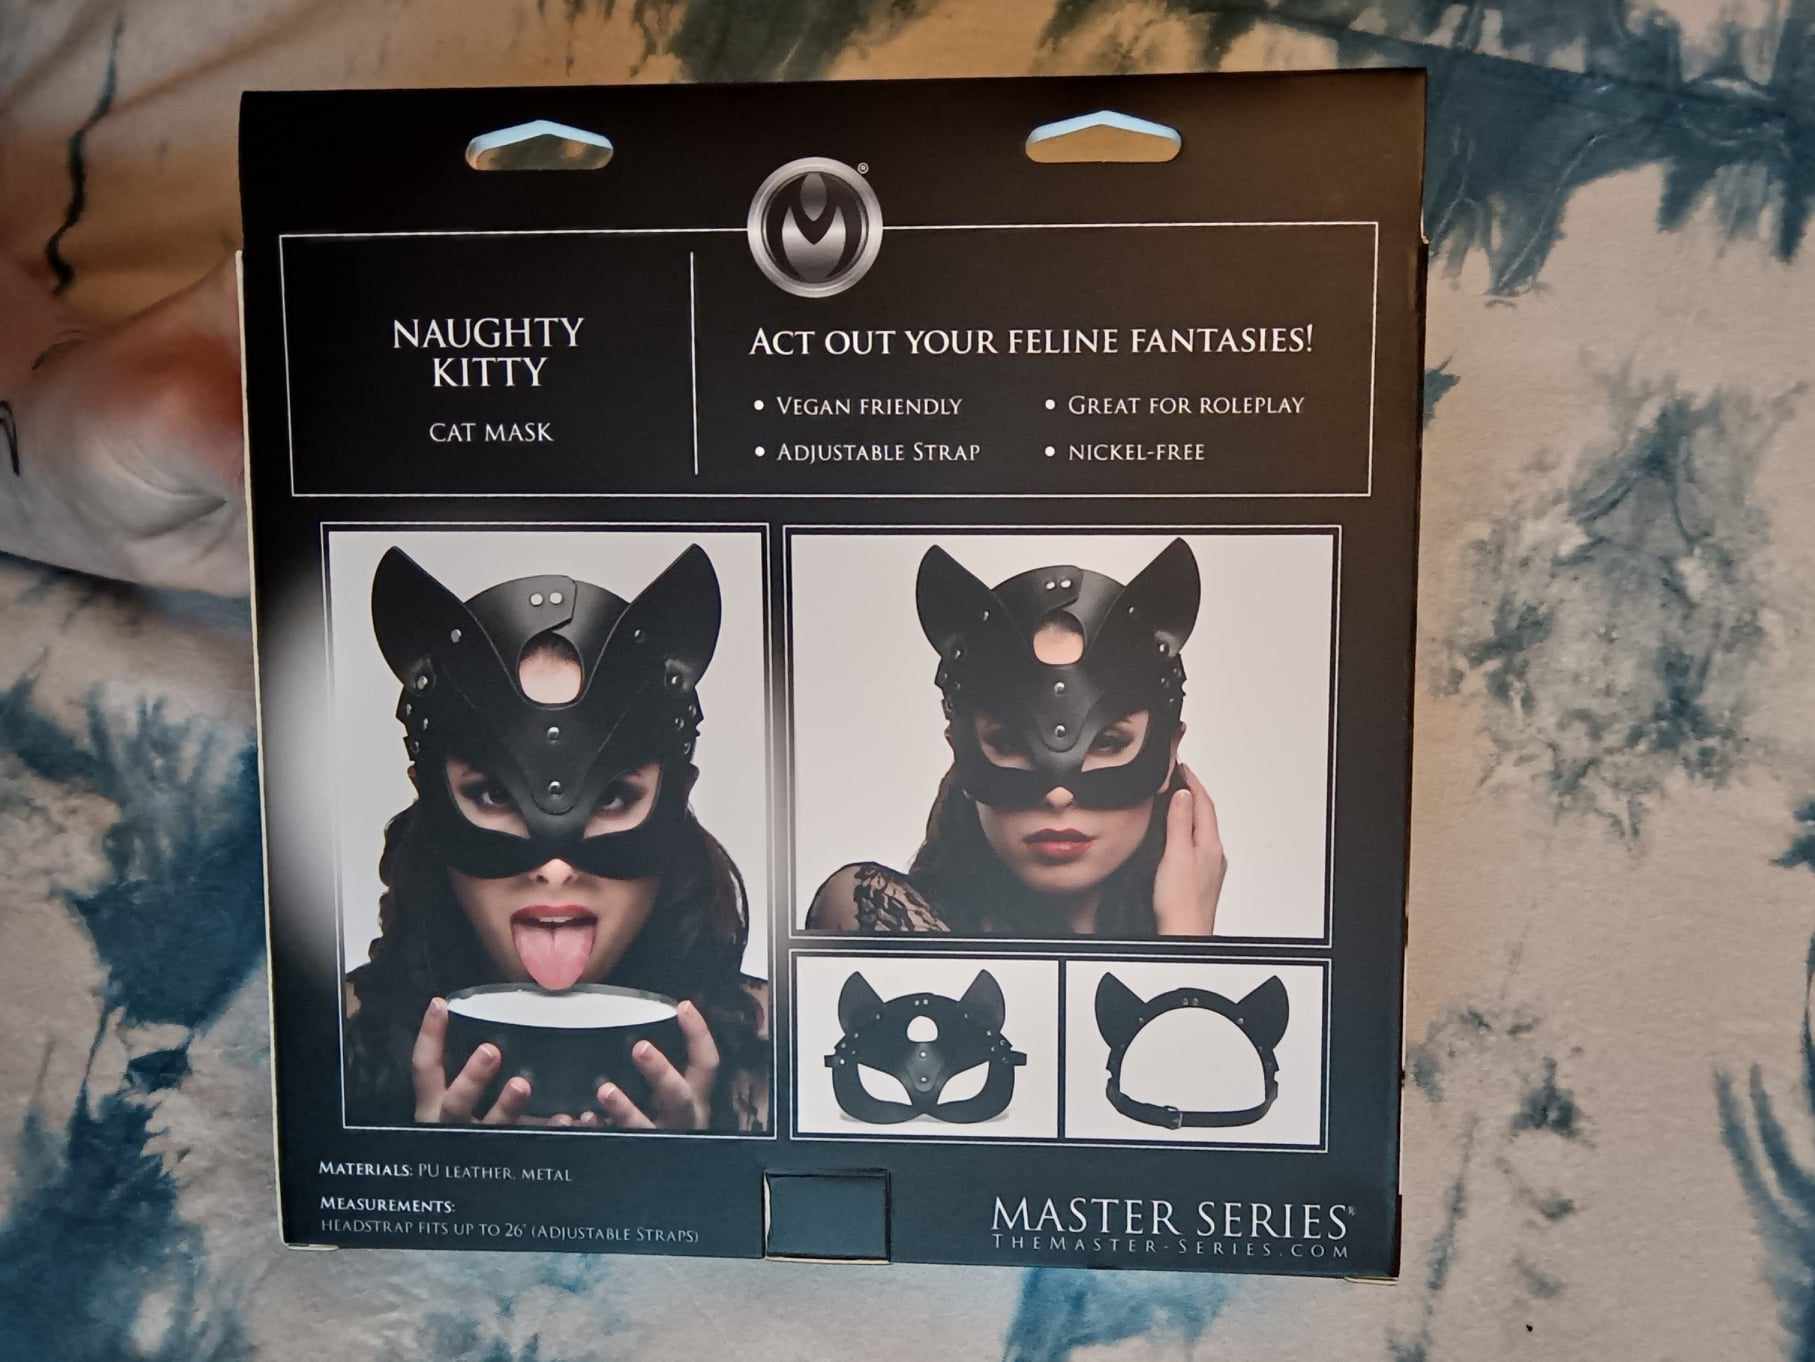  Master Series Naughty Kitty Cat Mask Exploring the Materials and Care of the  Master Series Naughty Kitty Cat Mask